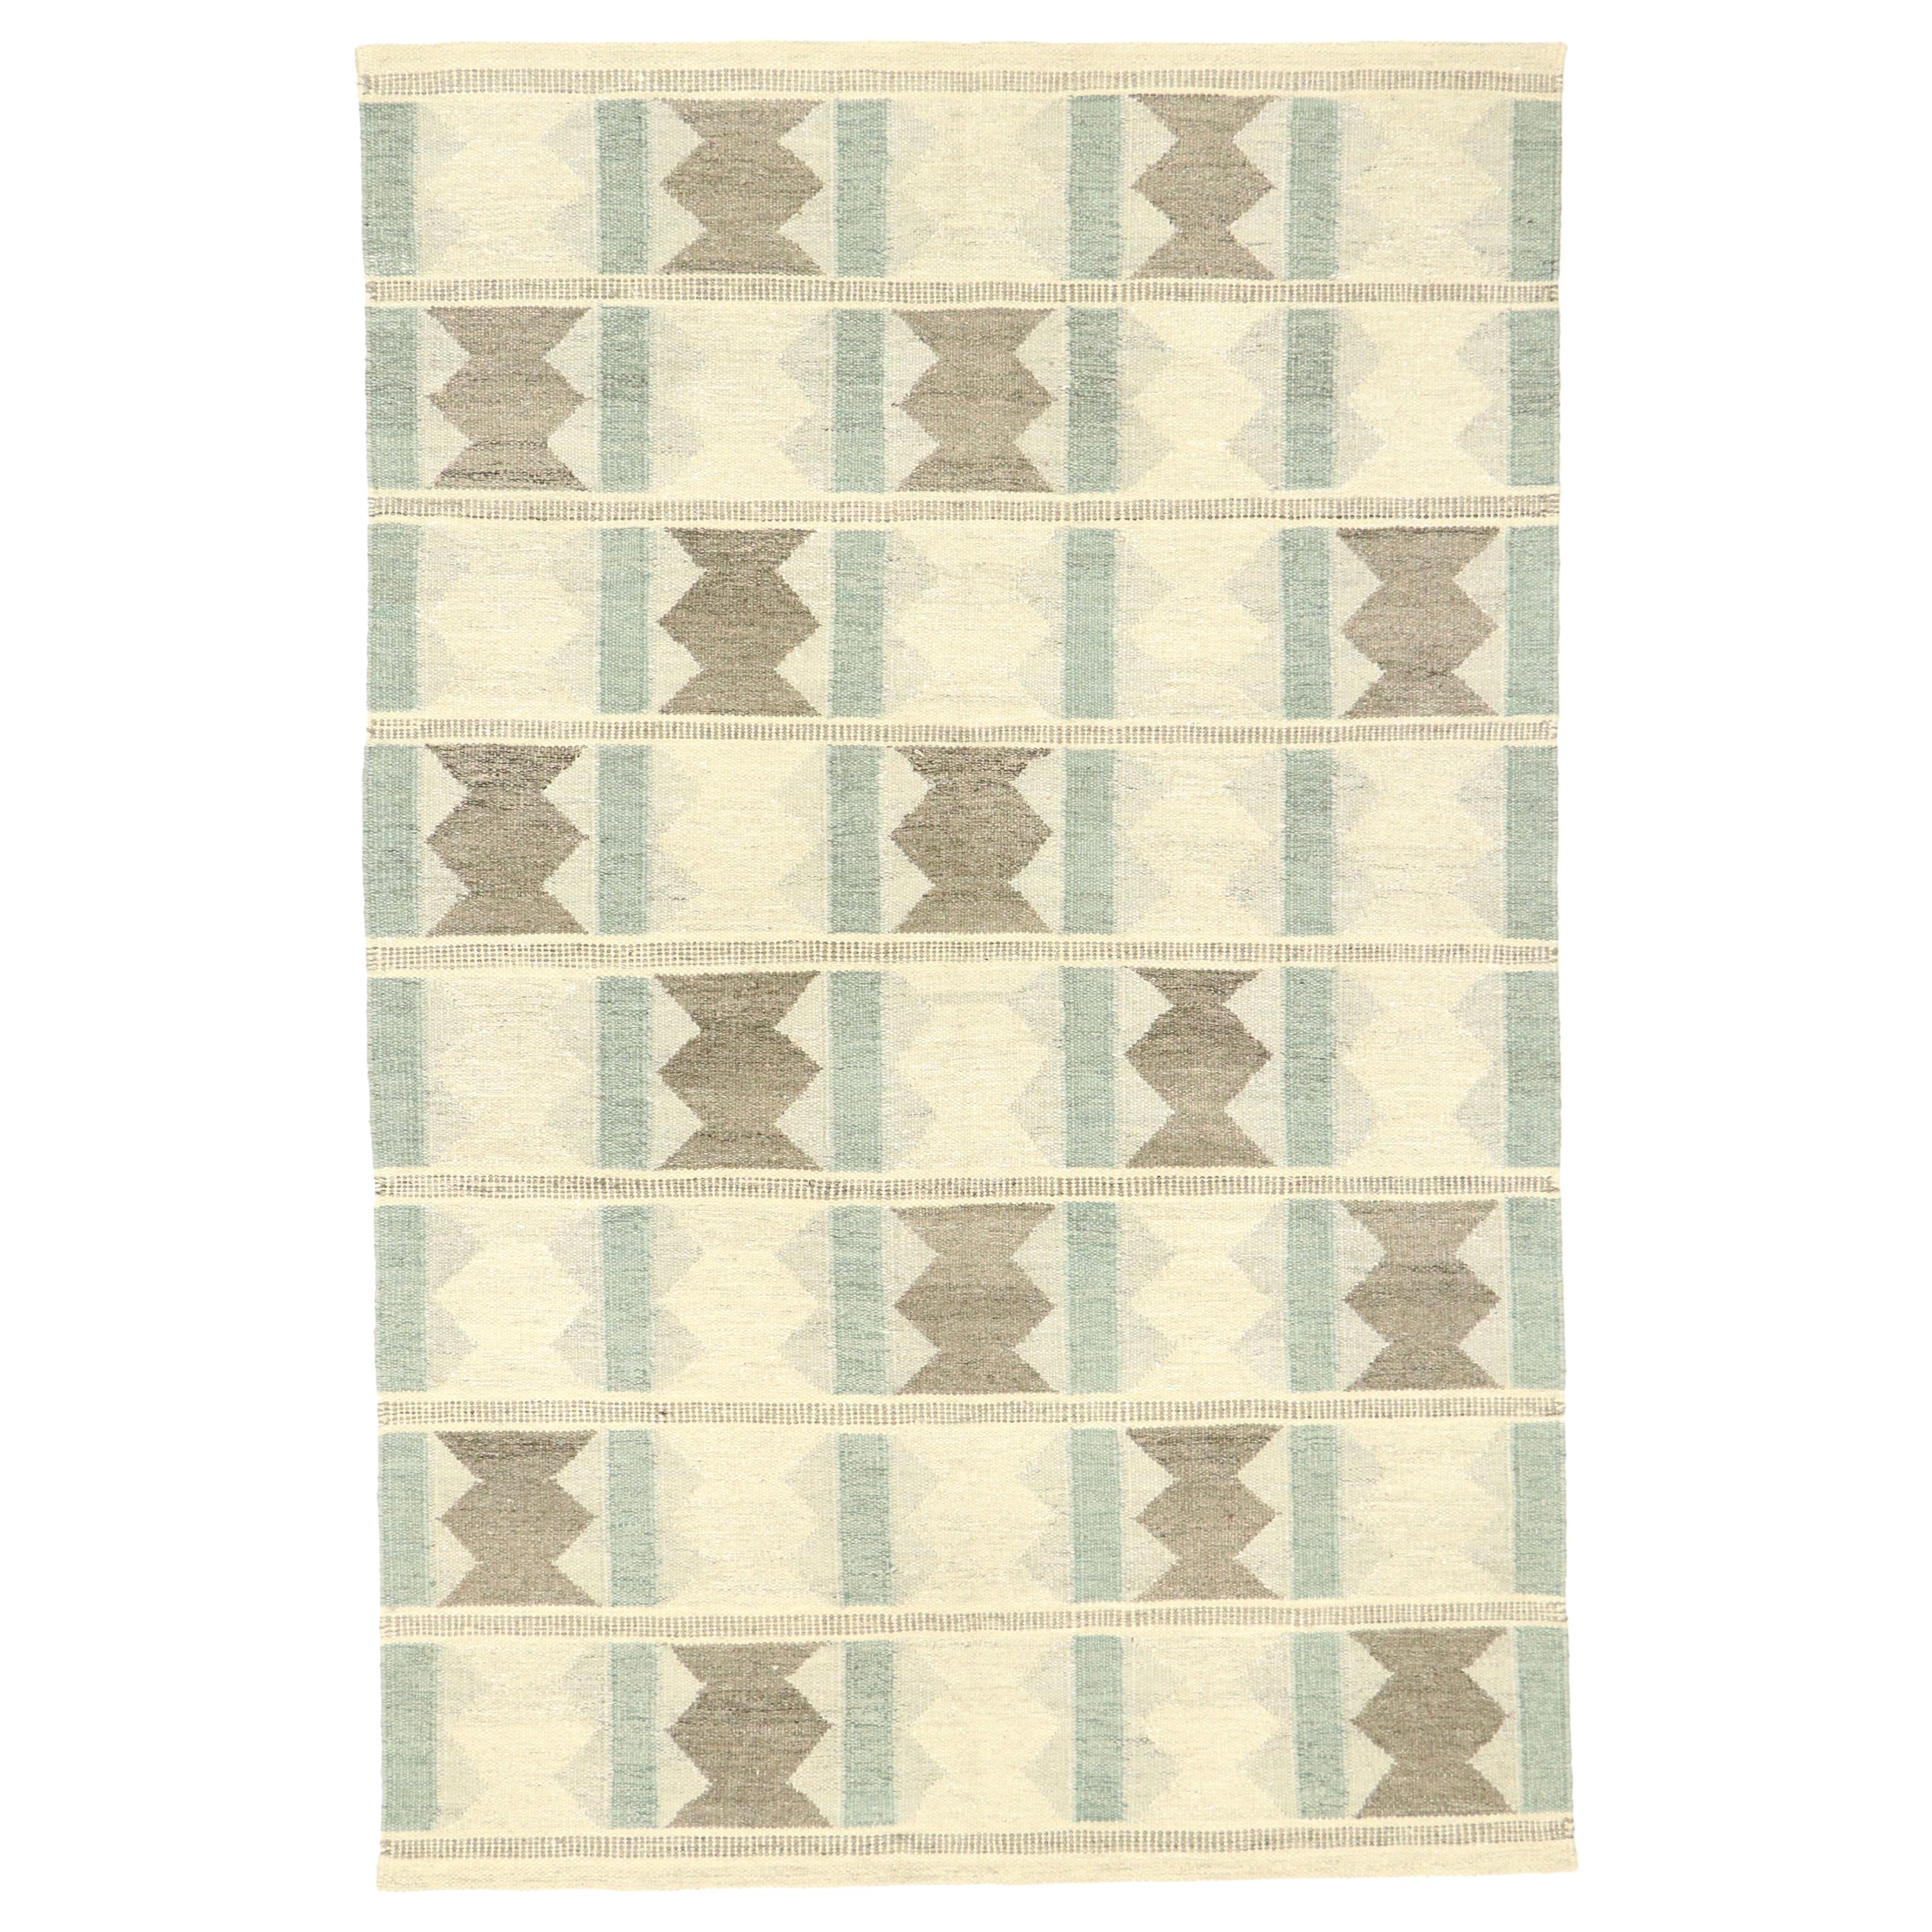 New Contemporary Swedish Indian Kilim Rug with Scandinavian Modern Style 